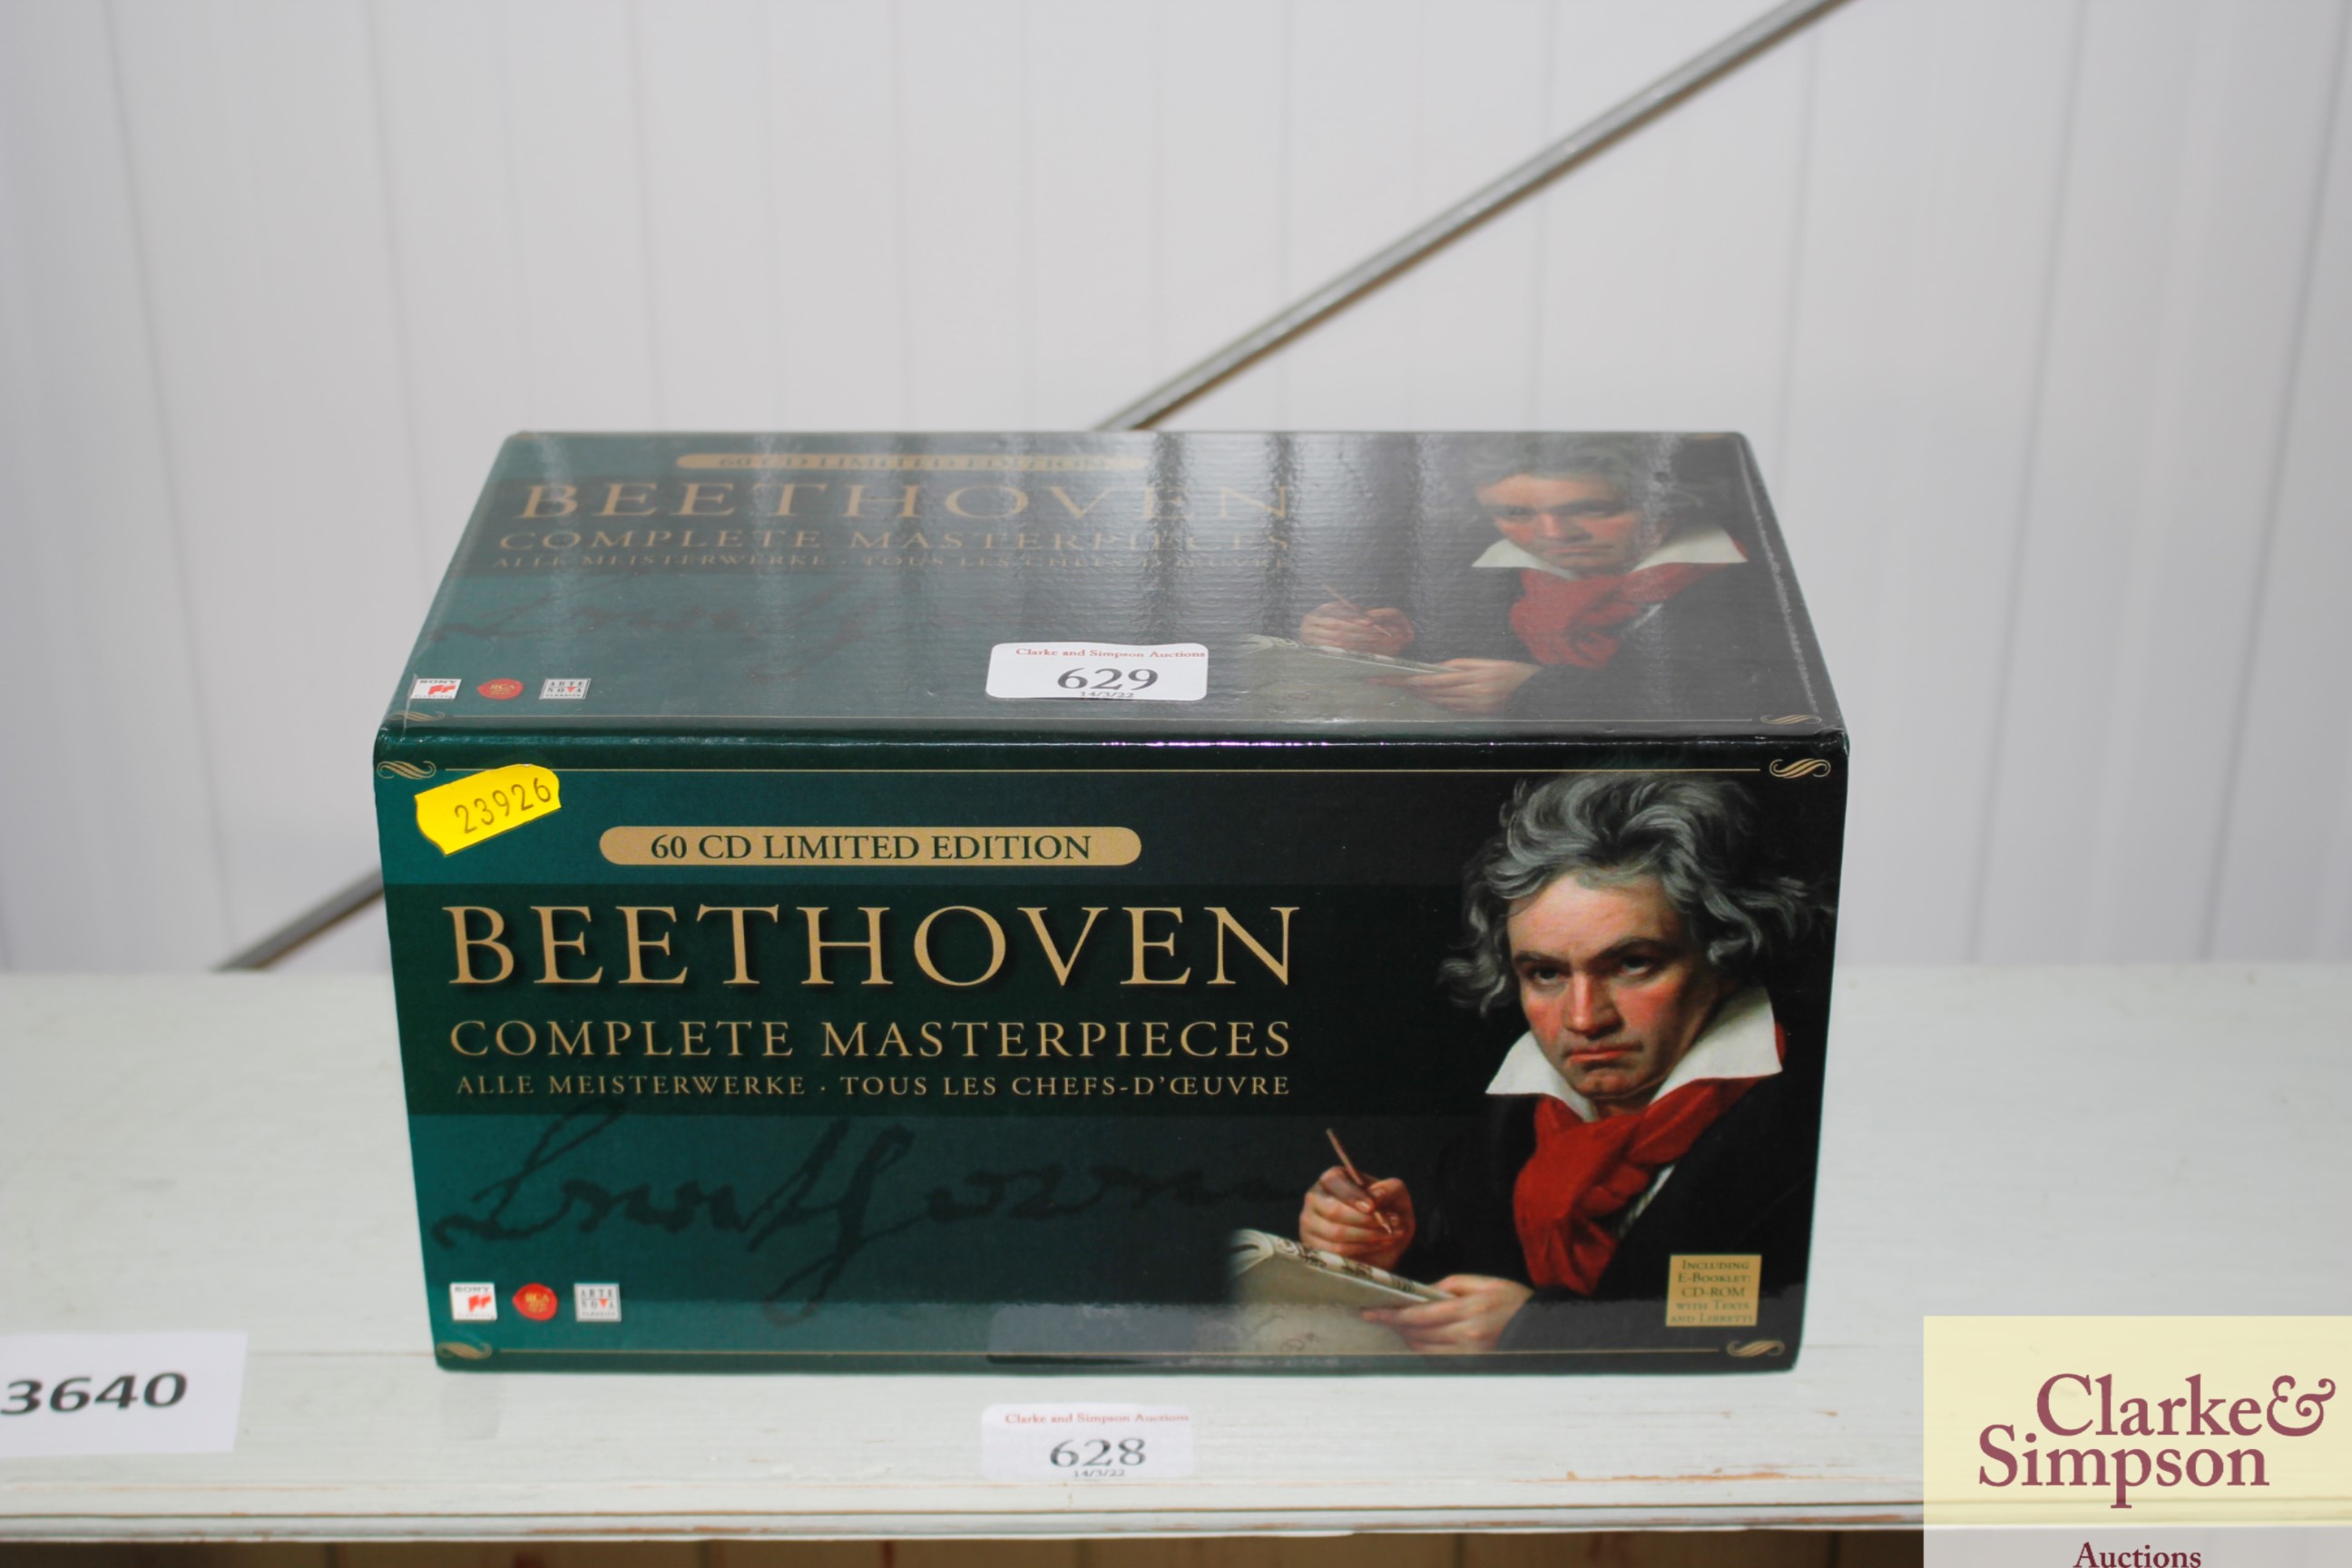 A sixty CD set of Beethoven's complete master pieces